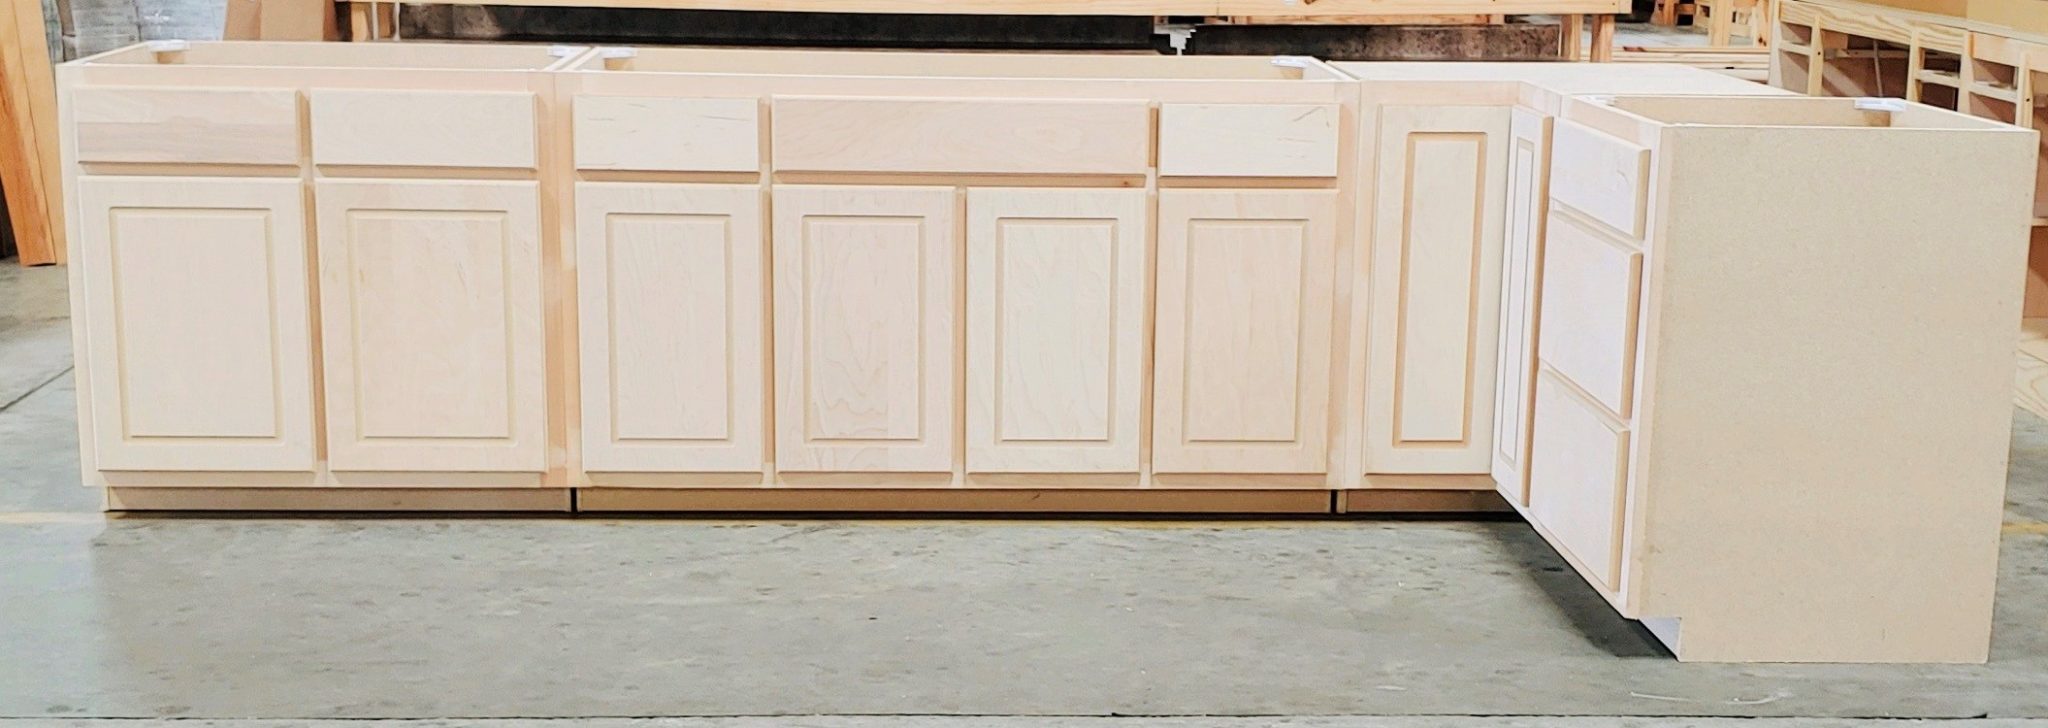 unfinished kitchen wall cabinet 40 x 24